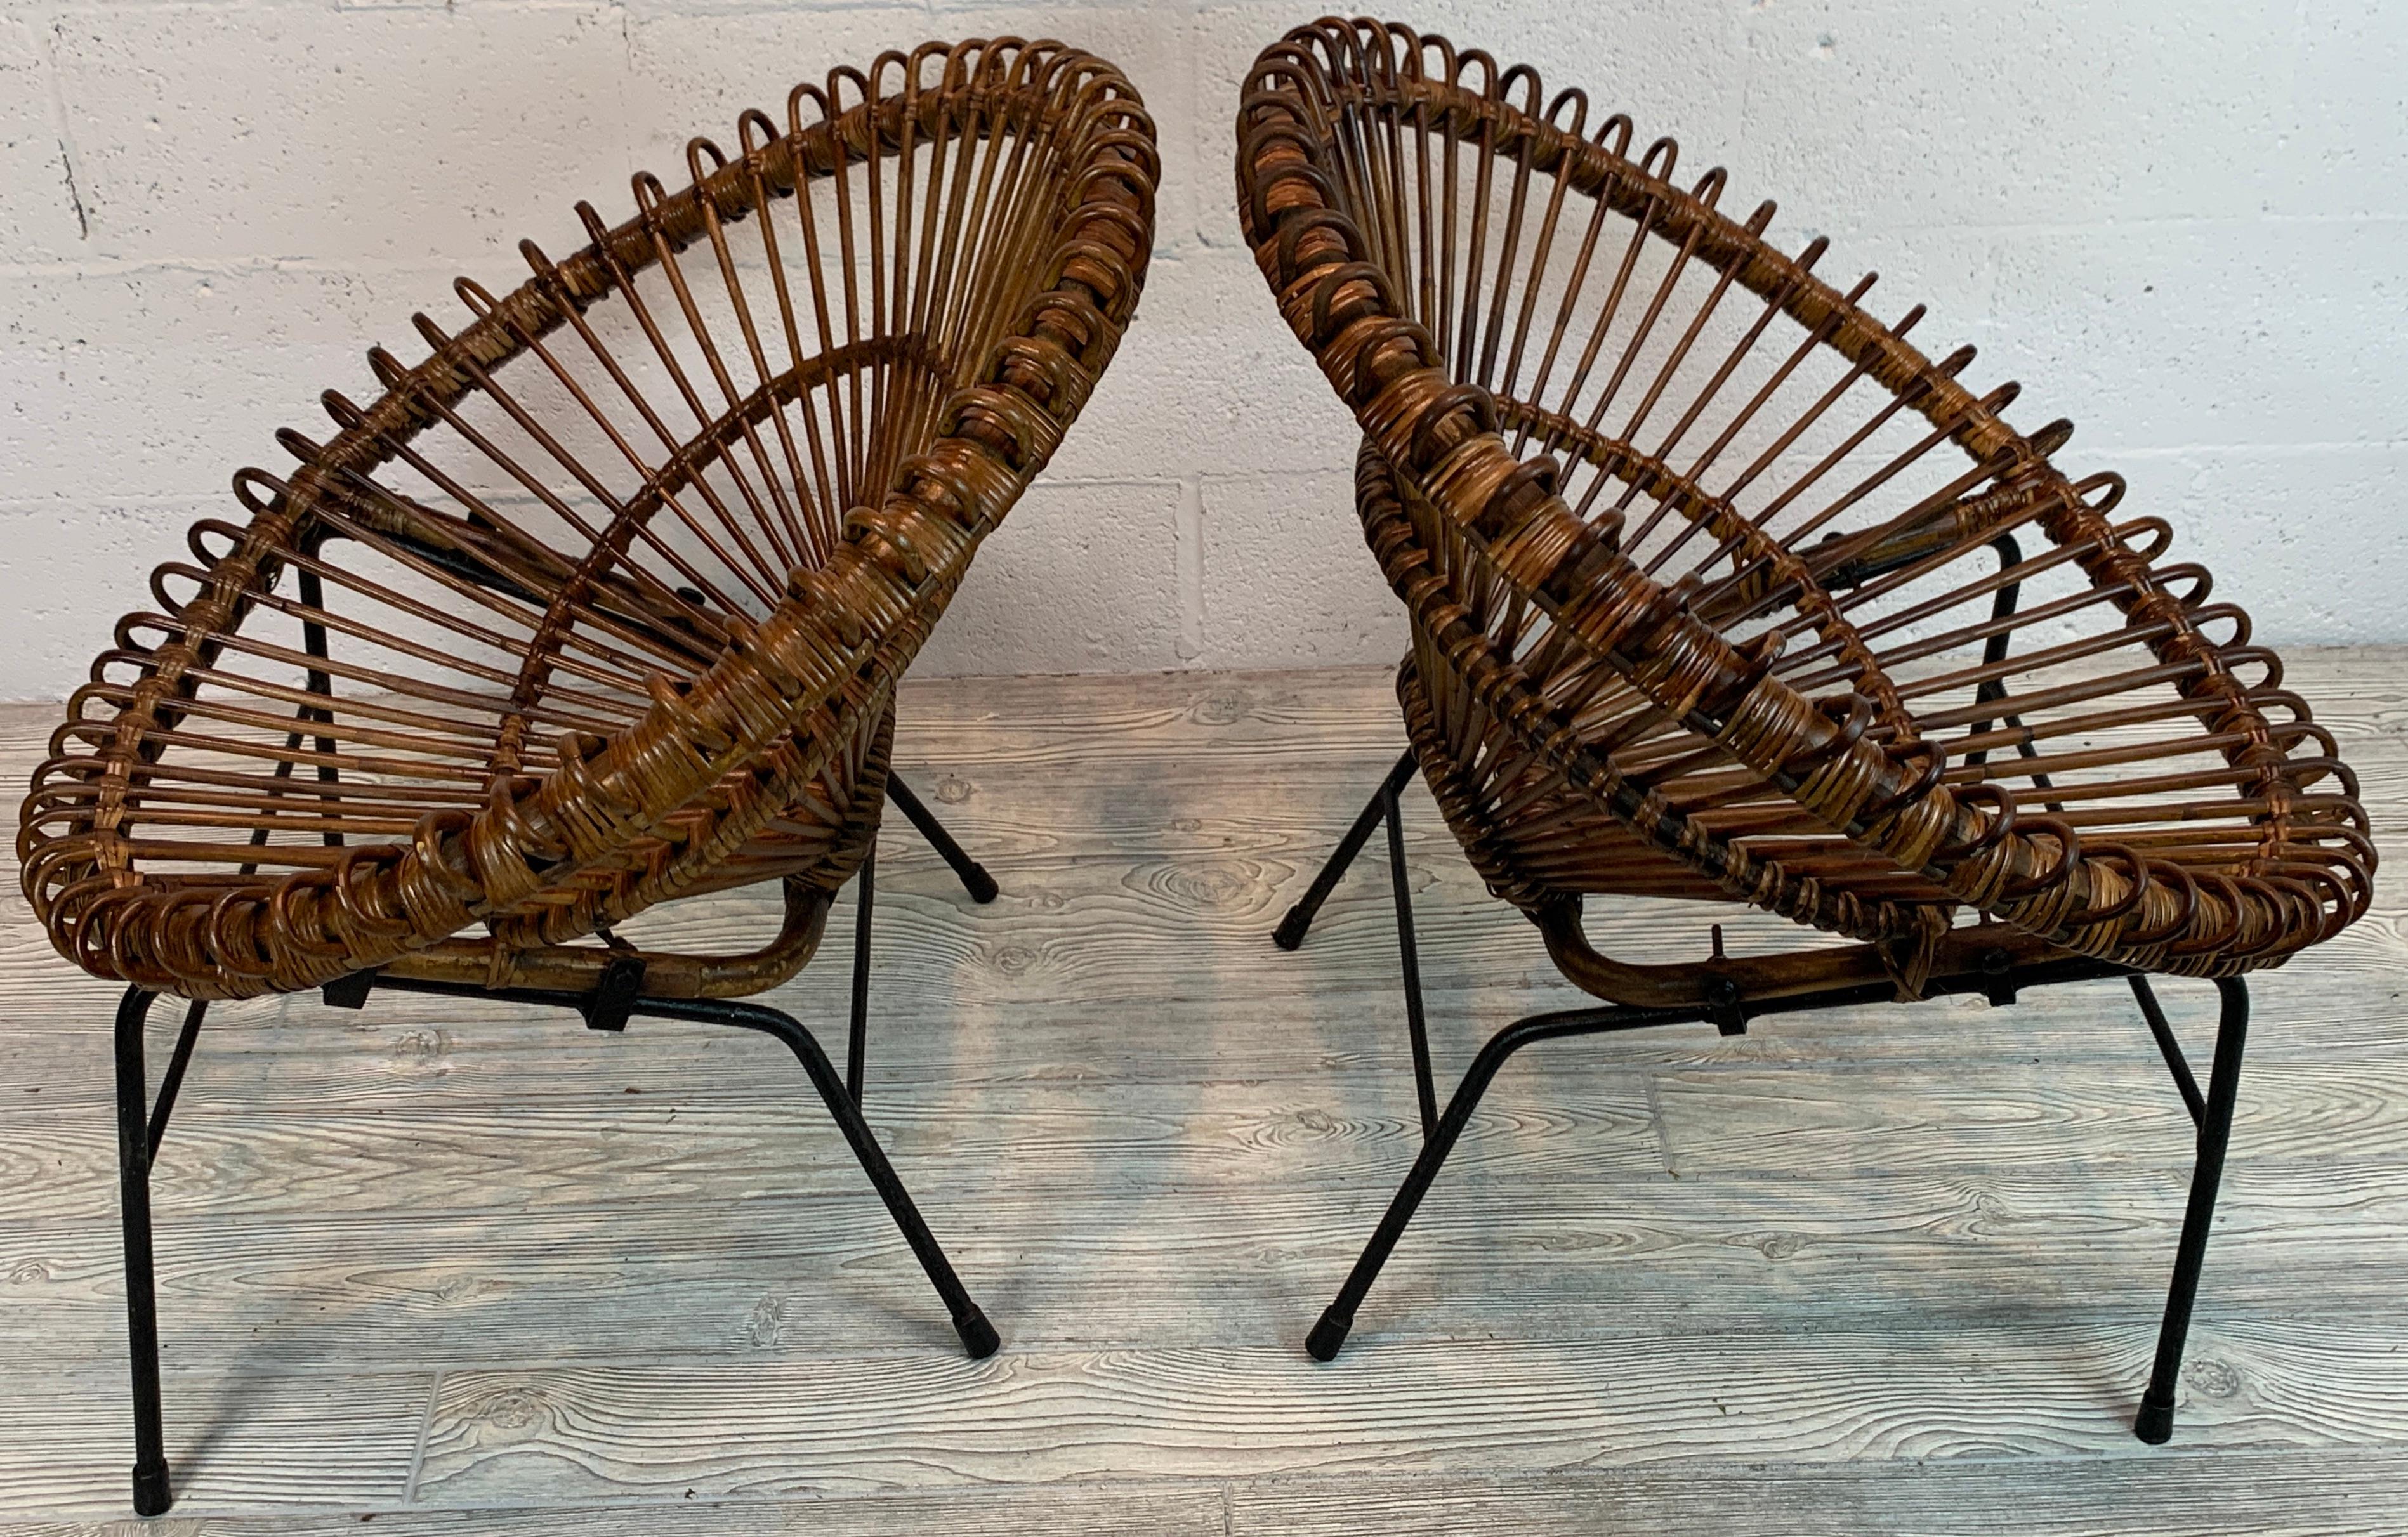 French Pair of Rattan Hoop Chairs, Janine Abraham Dirk Jan Rol France, Restored